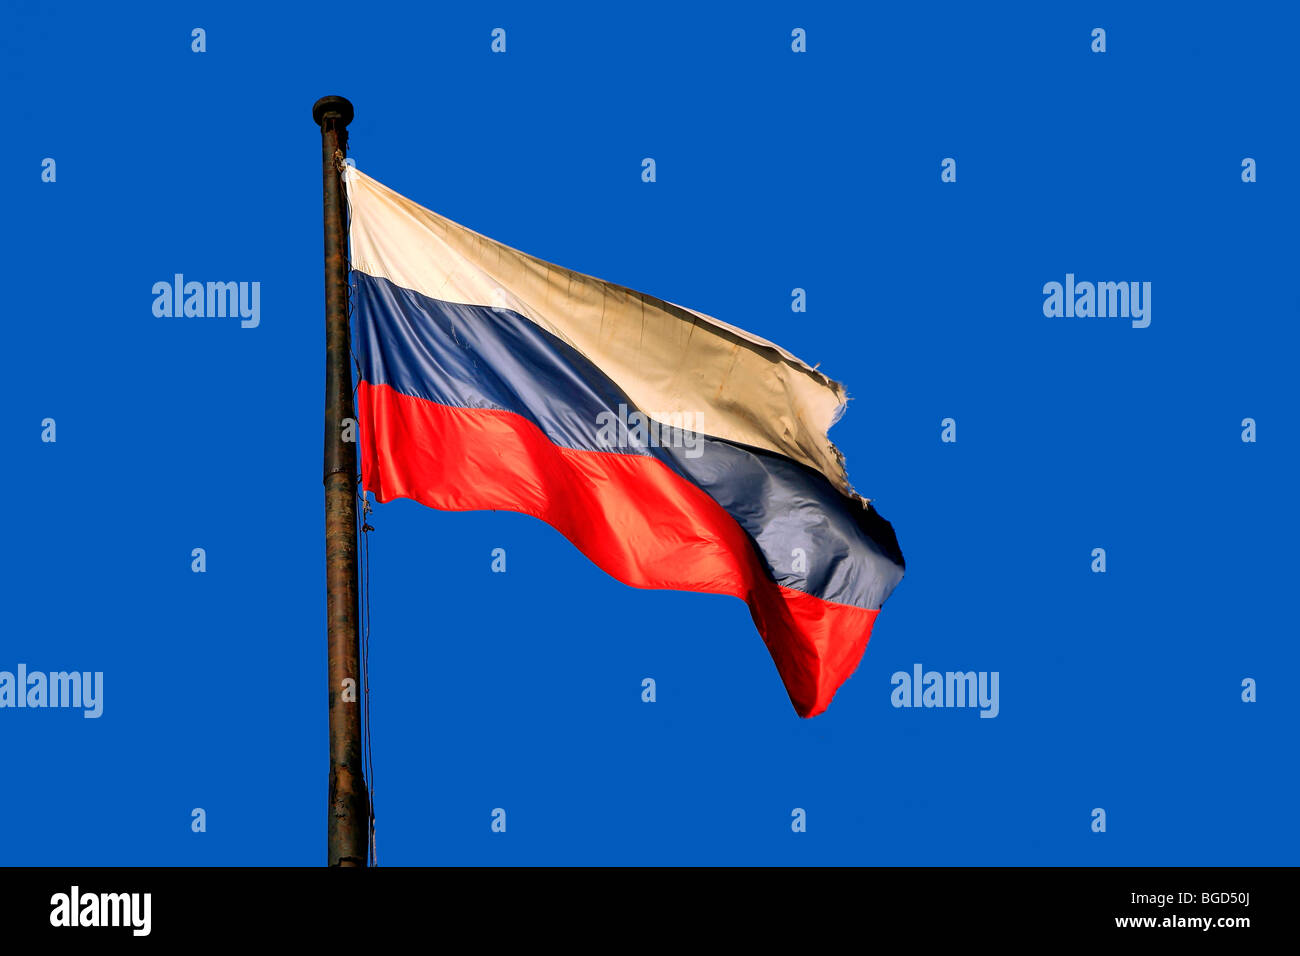 Russian flag Stock Photos, Royalty Free Russian flag Images